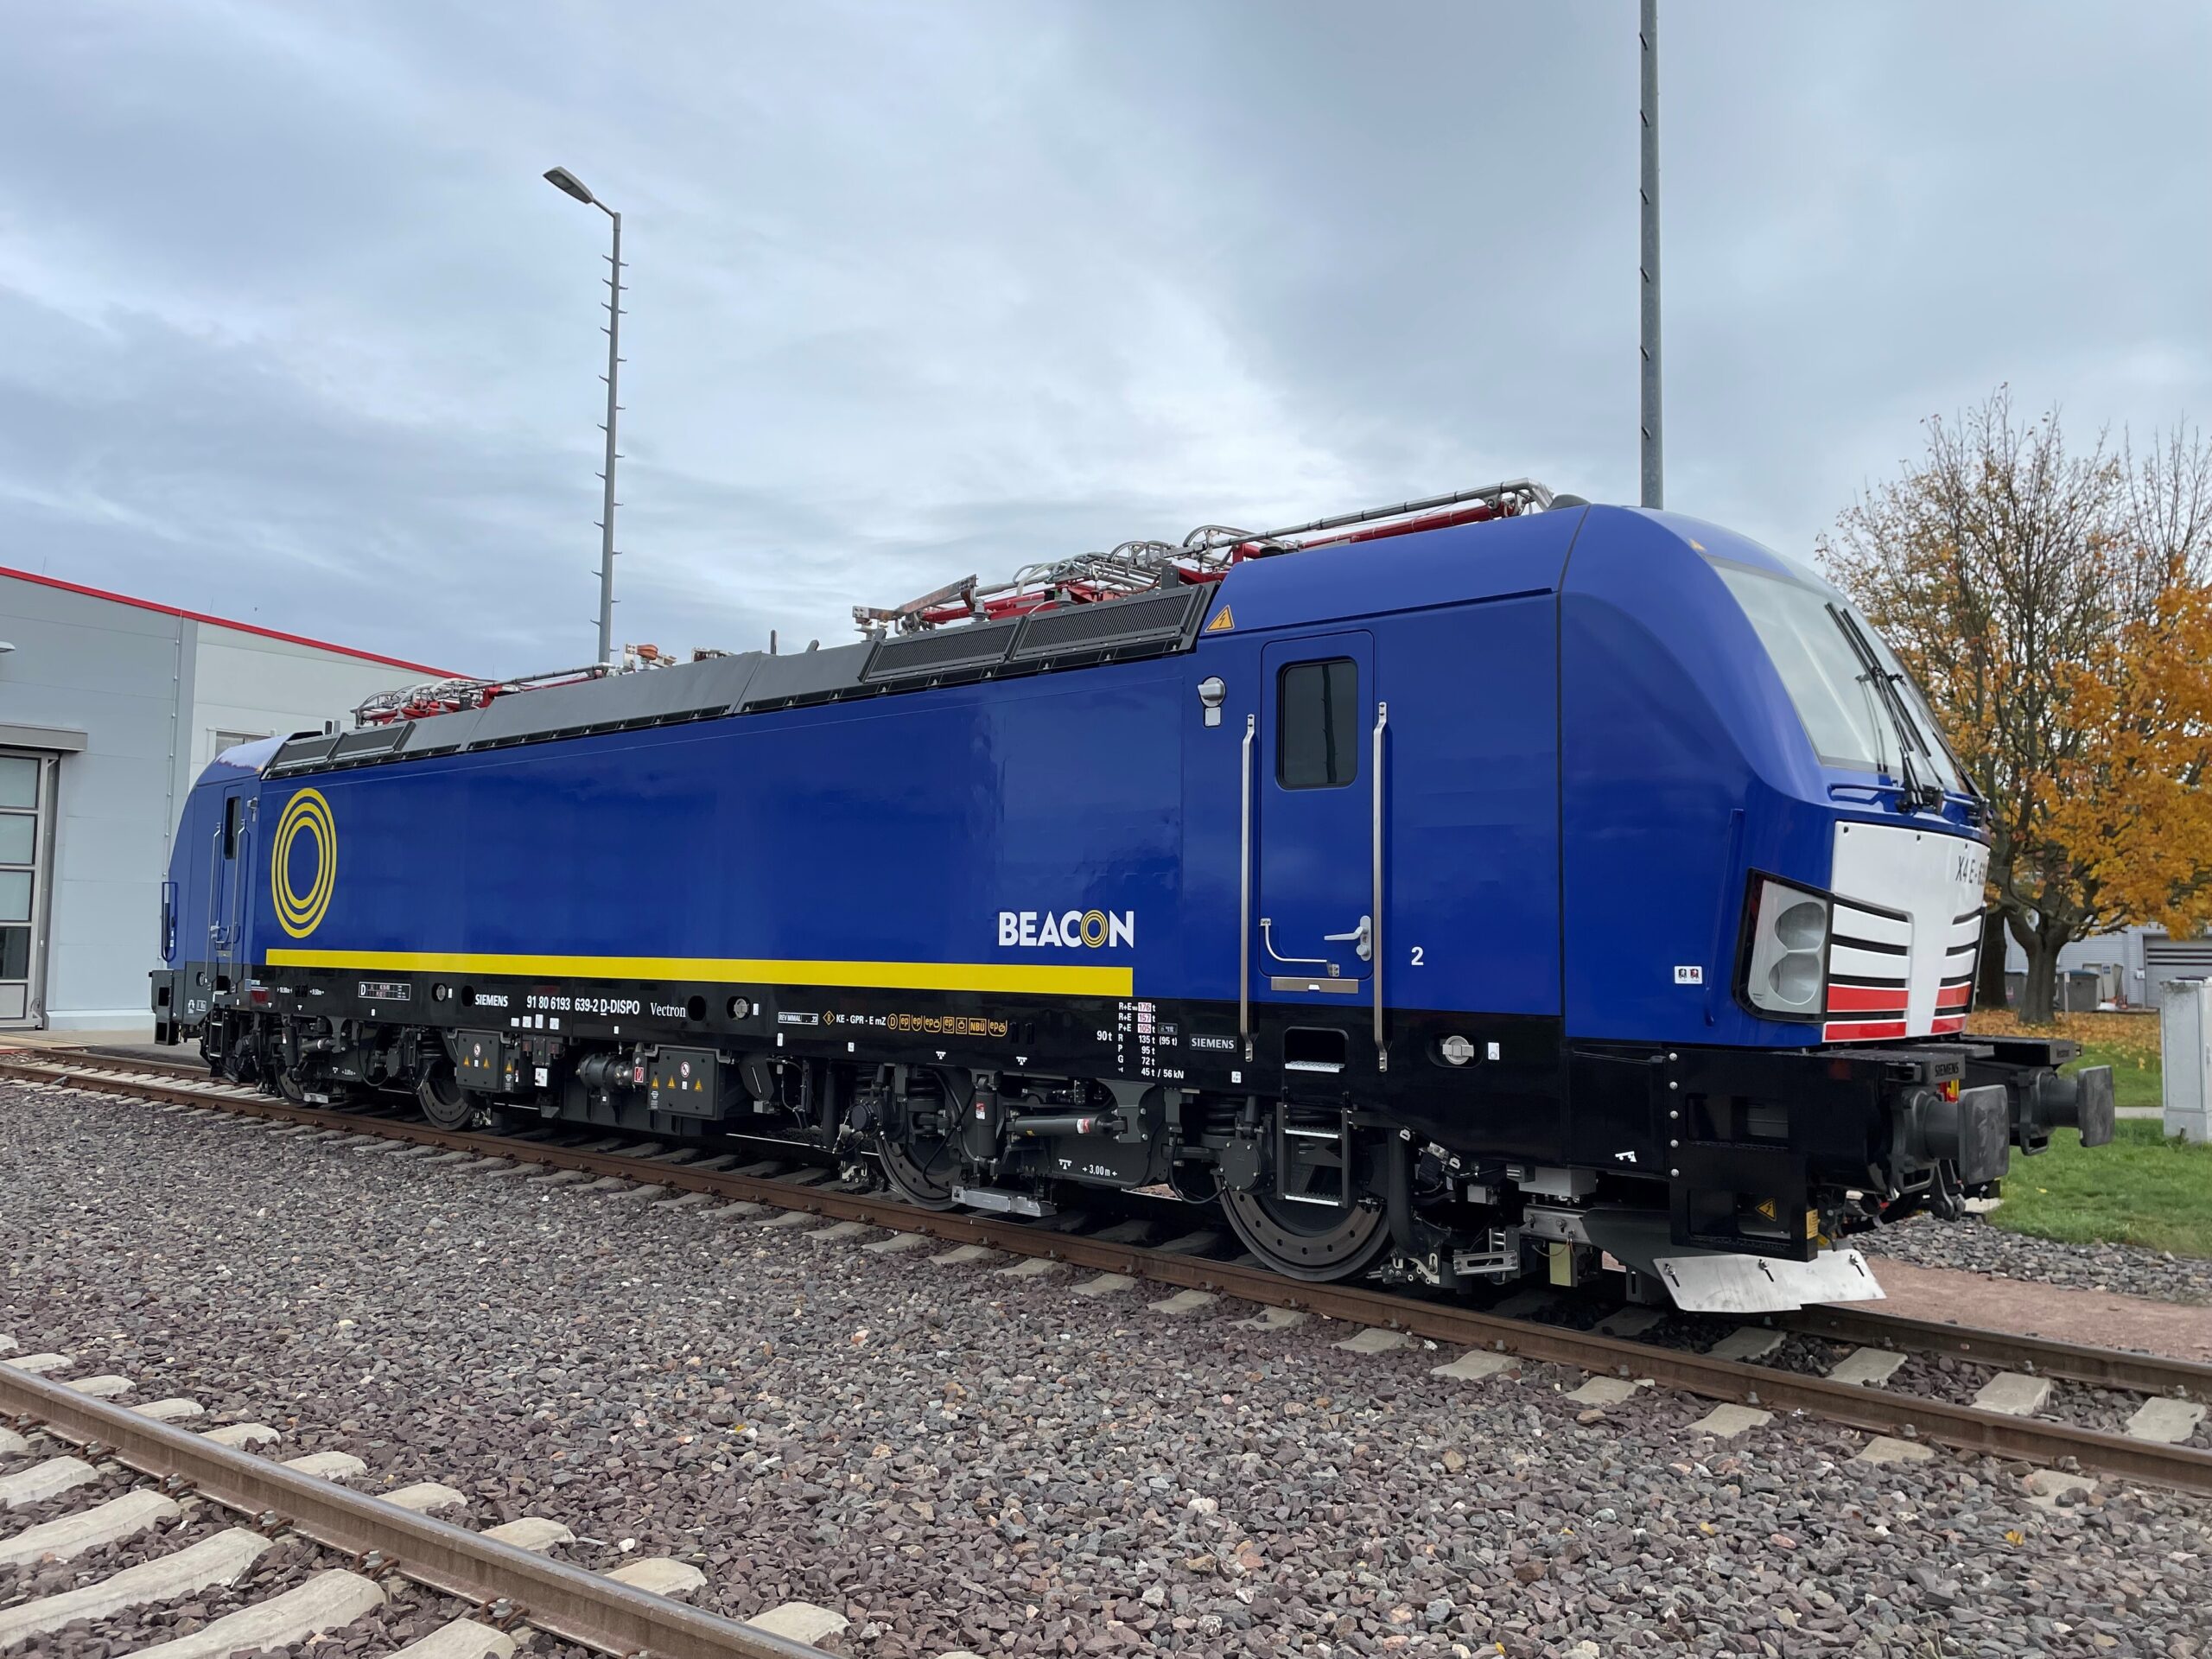 Beacon Rail orders 10 Vectron locomotives from Siemens Mobility